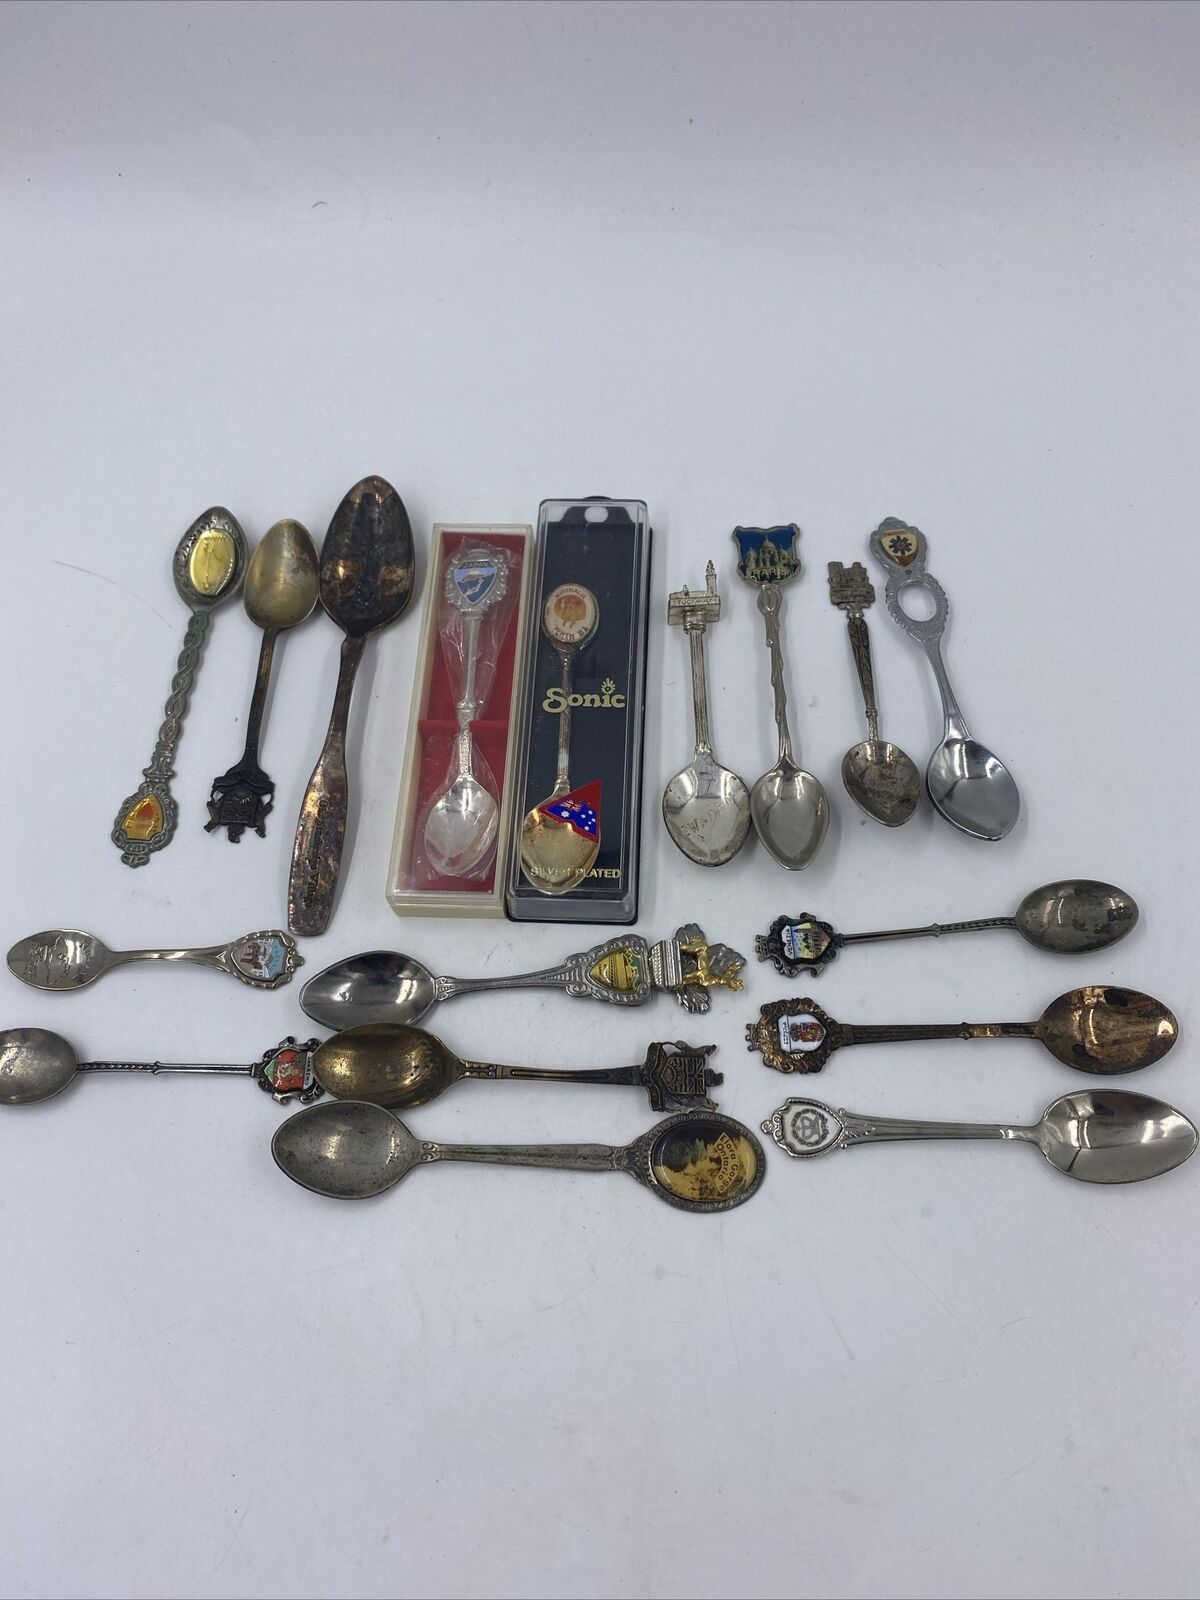 COLLECTORS SPOONS - Lot Of 17- Age Is Unknown (?)